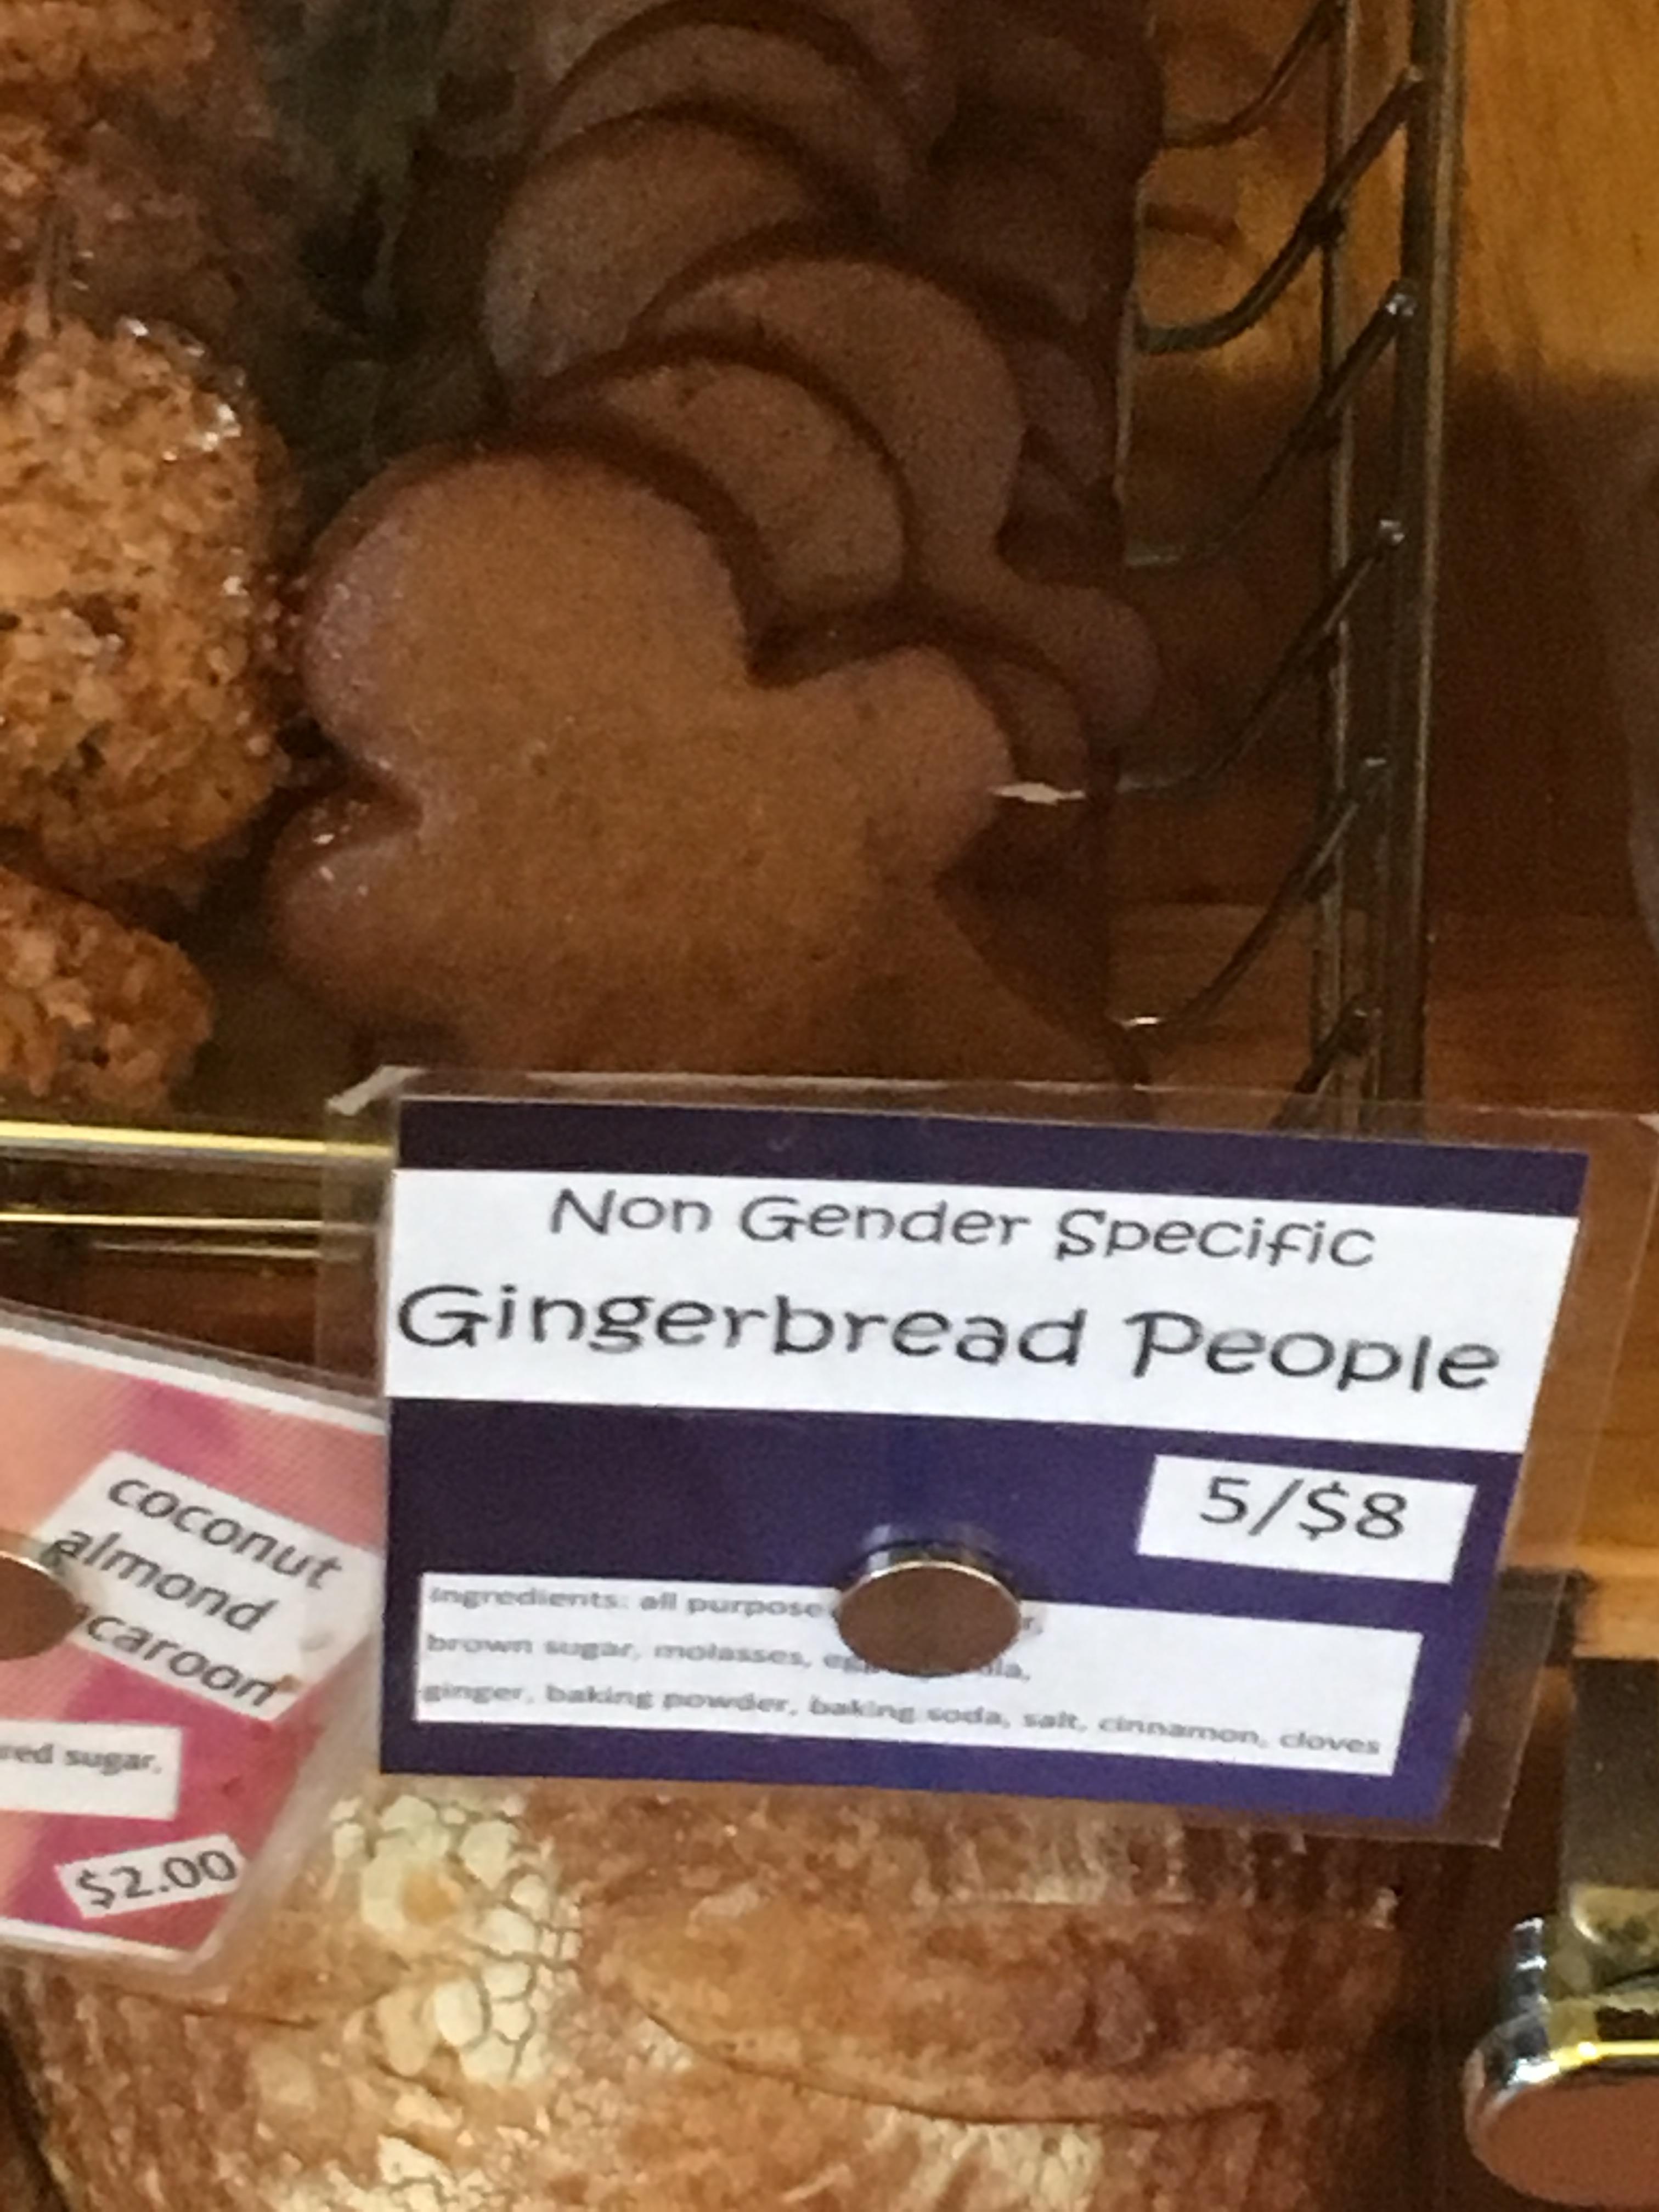 non gender specific gingerbread people - Non Gender Specific Gingerbread People 5$8 Coconut almond carport $2.00